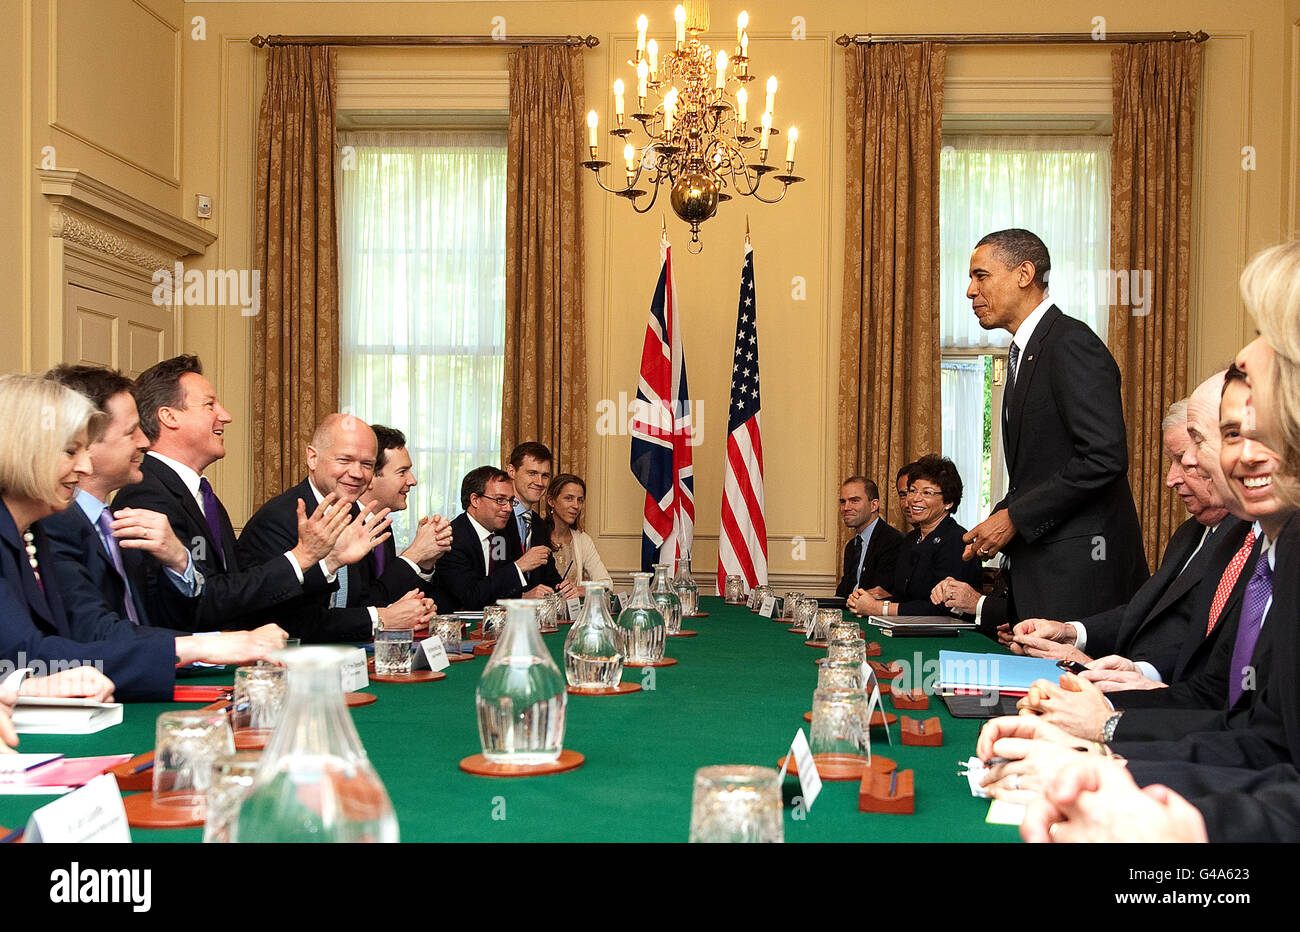 American President Barack Obama (5th right) during a meeting meets with Prime Minister David Cameron (3rd left) and other delegates at 10 Downing Street, London. PRESS ASSOCIATION Photo. Picture date: Wednesday May 25, 2011. See PA story ROYAL Obama. Photo credit should read: Leon Neal/PA Wire Stock Photo